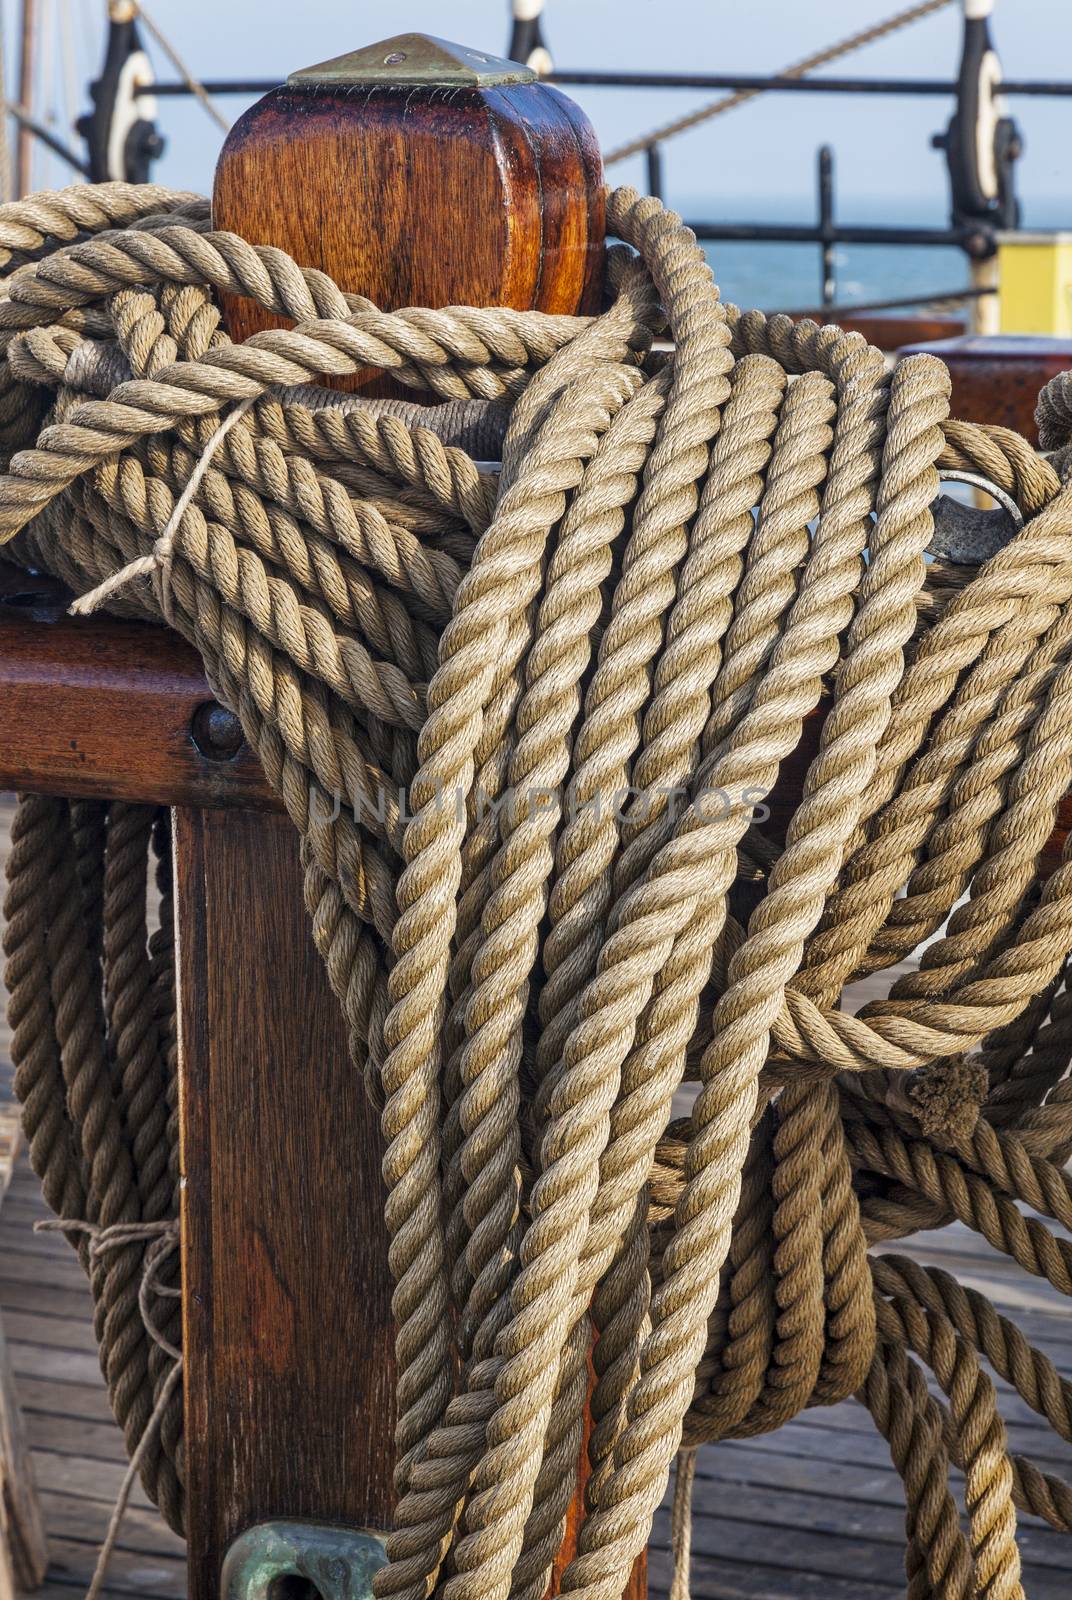 coiled ropes on a sail ship by PixelsAway